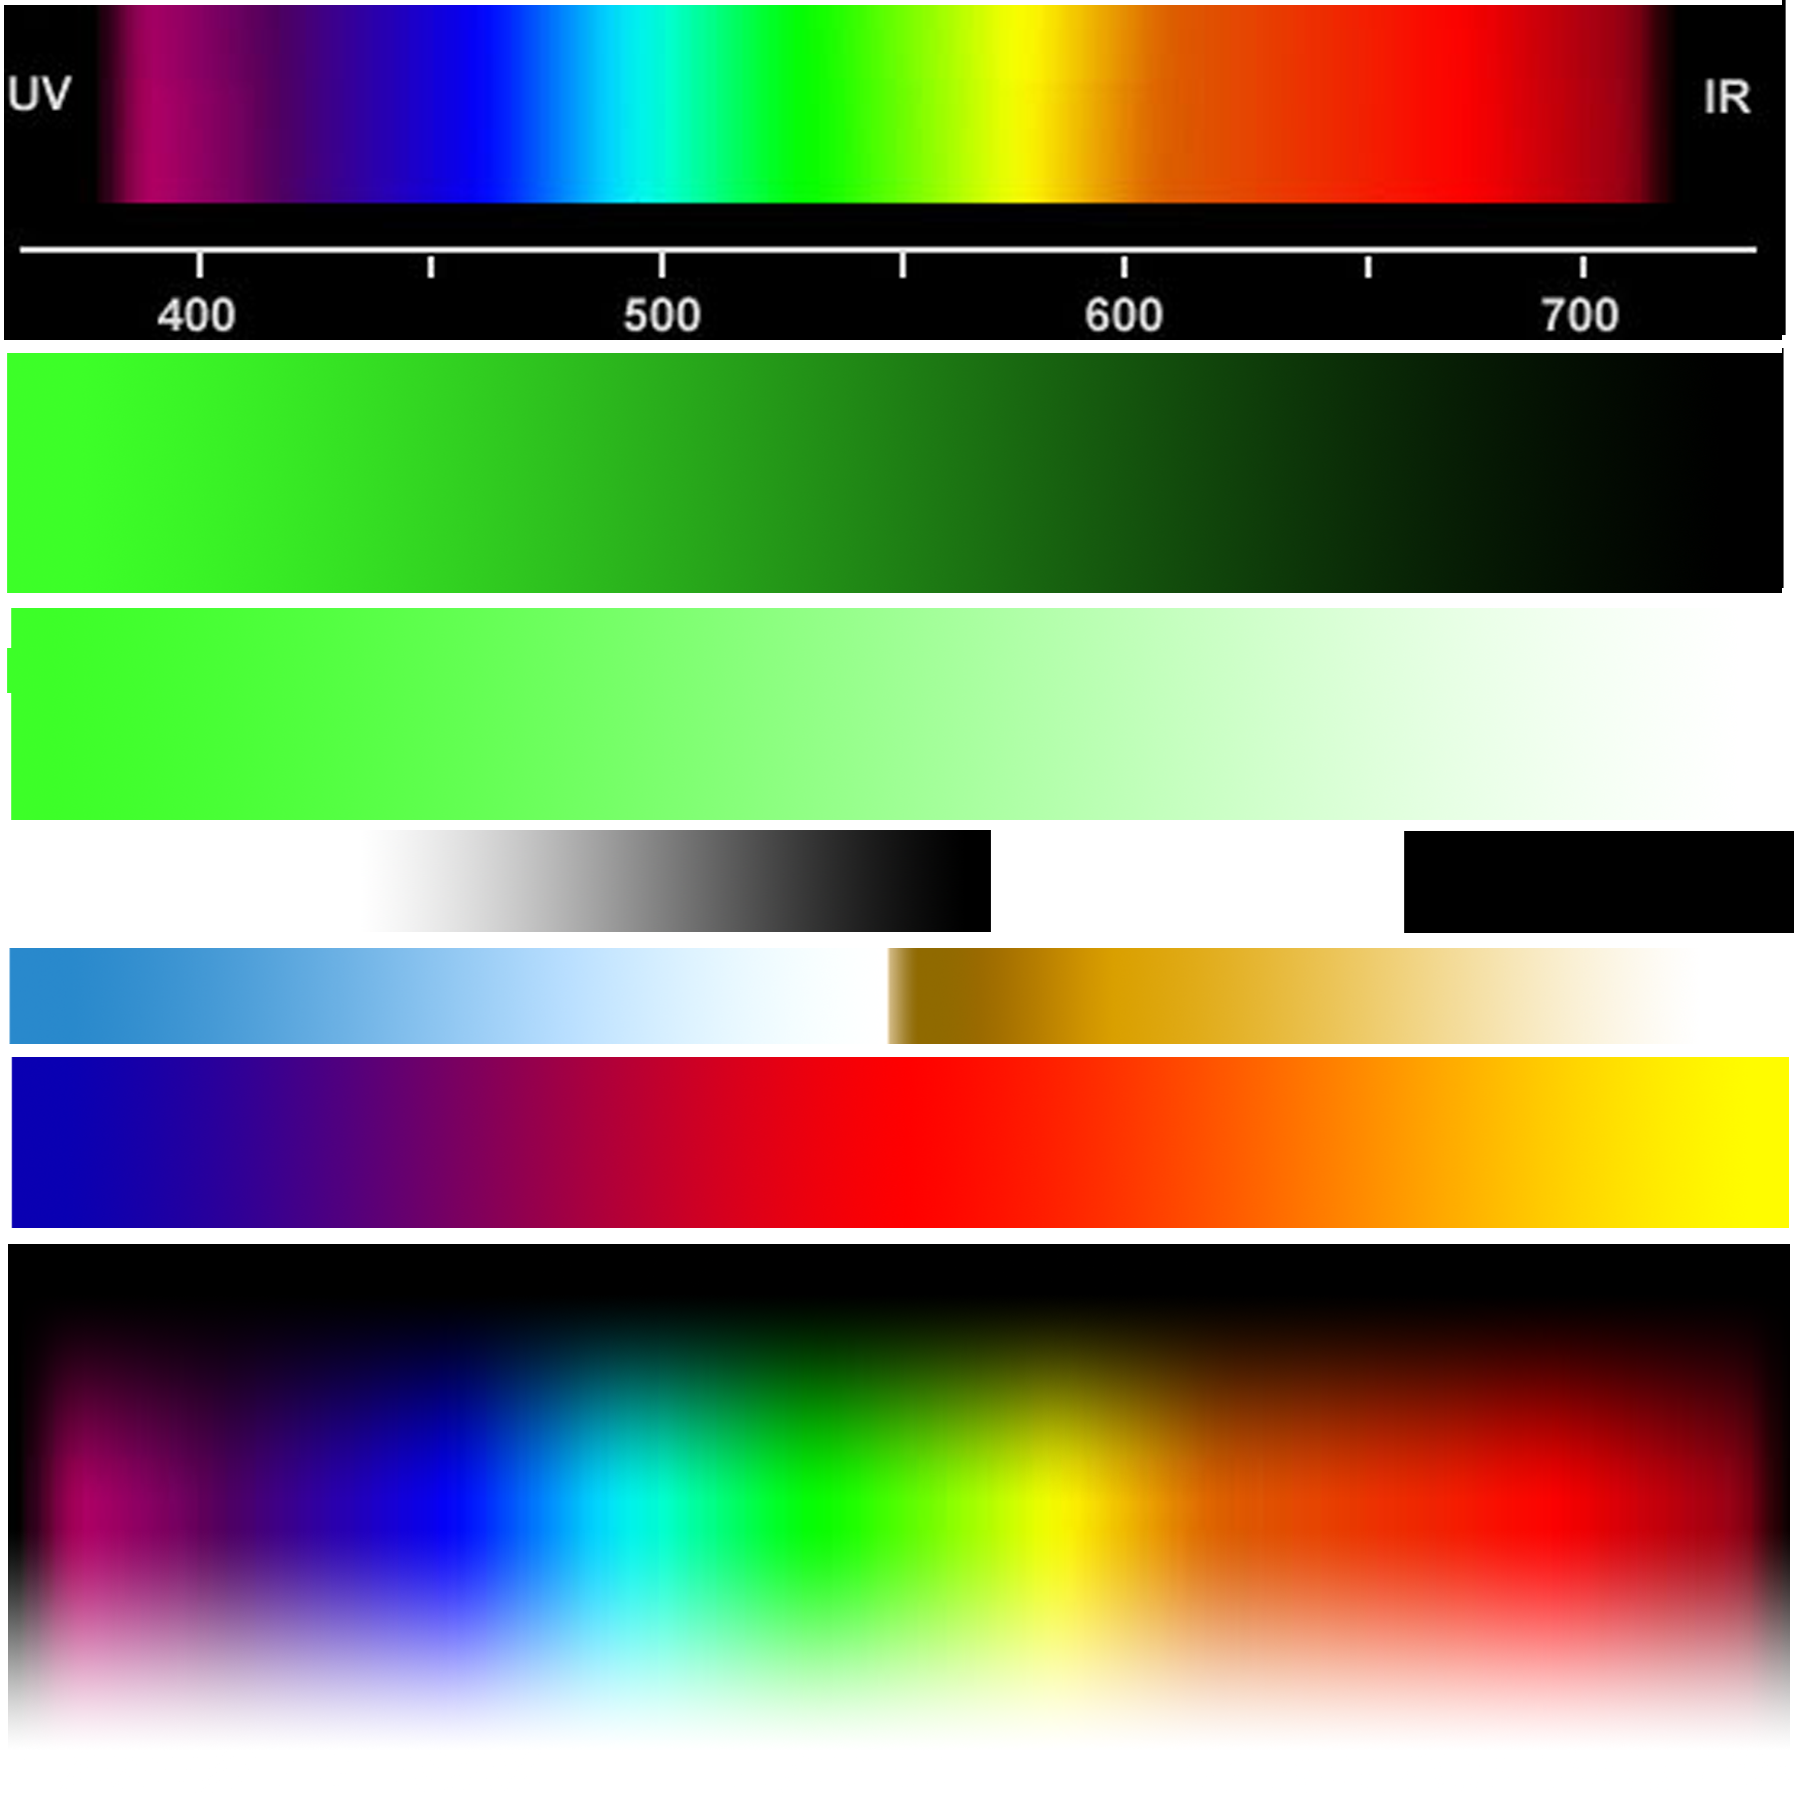 test image with all colors, UV to IR spectrum in top bar, saturated green to dark green in next bar, saturated green to white in next bar, transparent, white to black greyscale, then white, then black in next bar, sunset colors in next bar (purple on left, yellow on right), last bar has UV to IR spectrum blended to black at top and white at bottom.